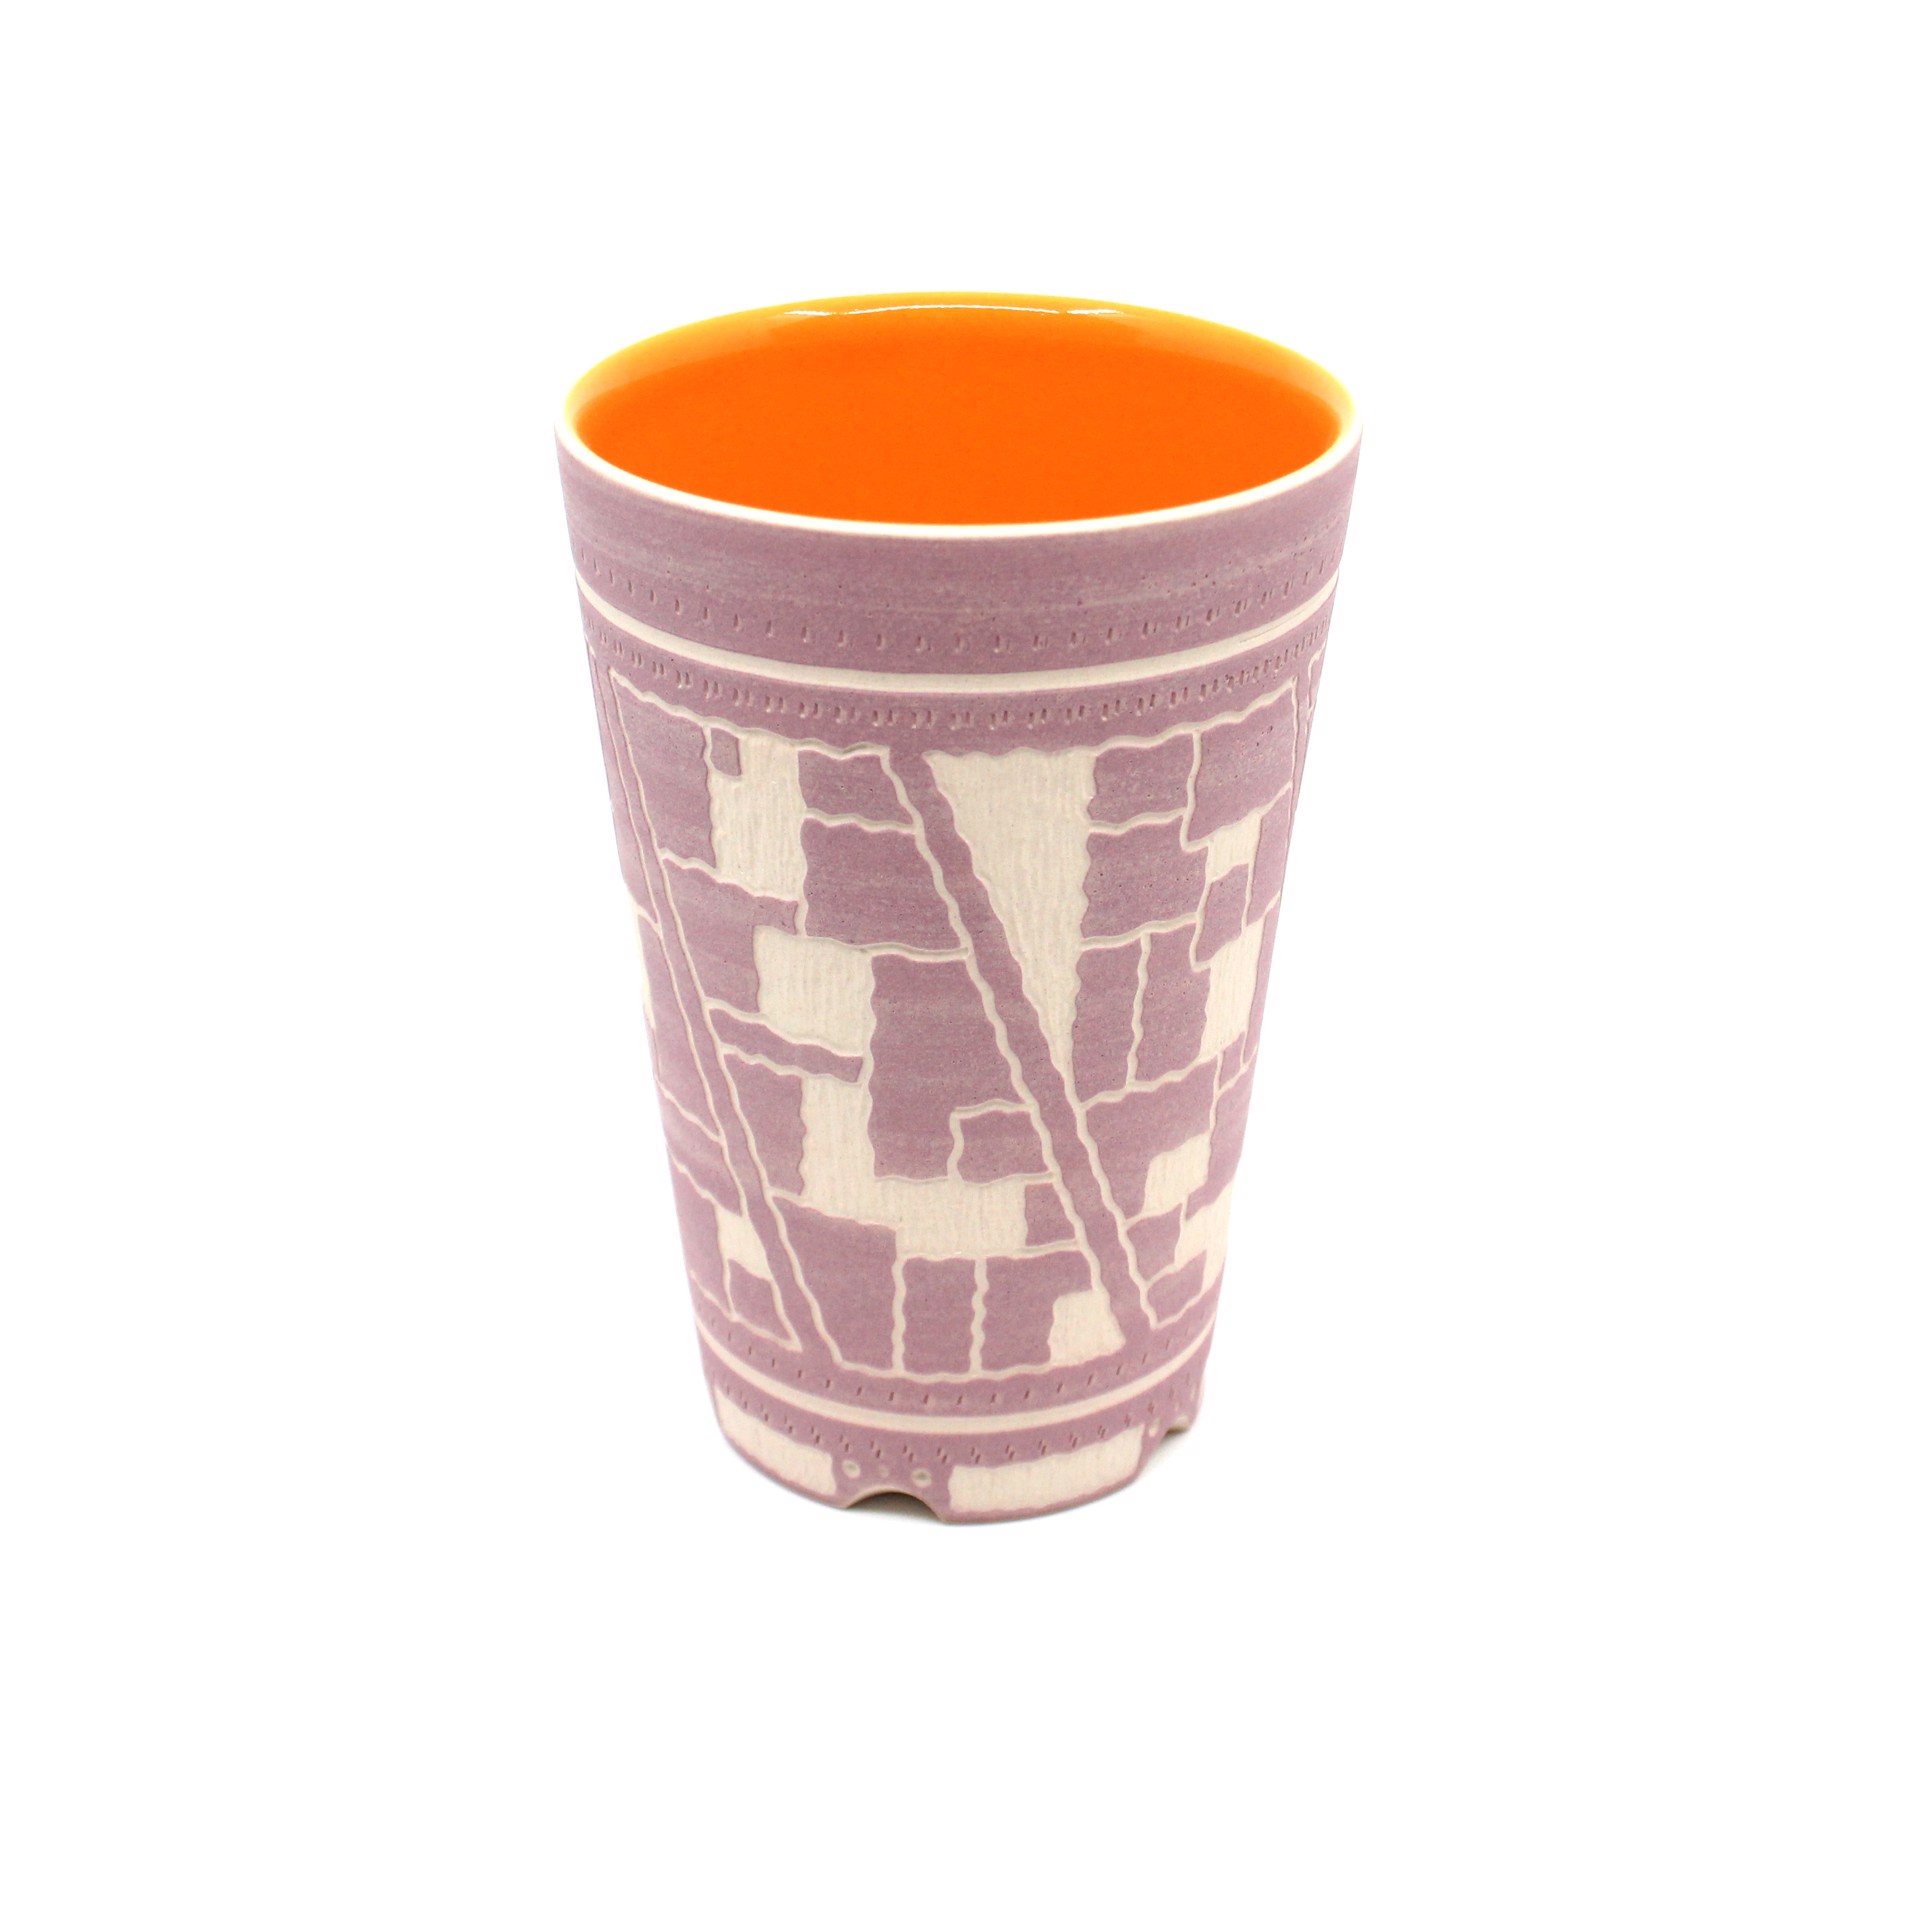 Tall Cup (Orange / Pink) by Chris Casey